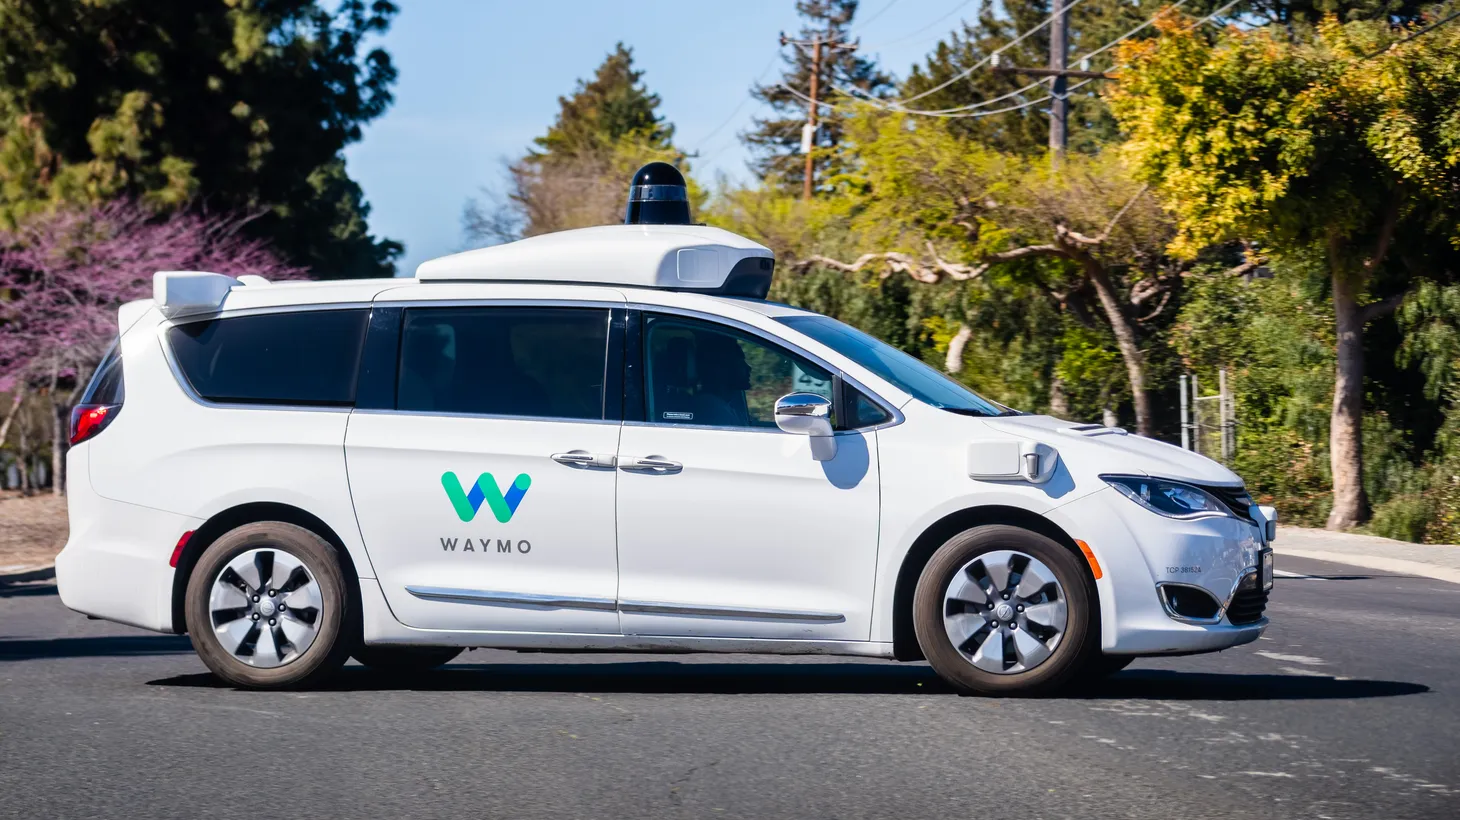 A Waymo self-driving car performs tests on a street near Google's offices in Silicon Valley.